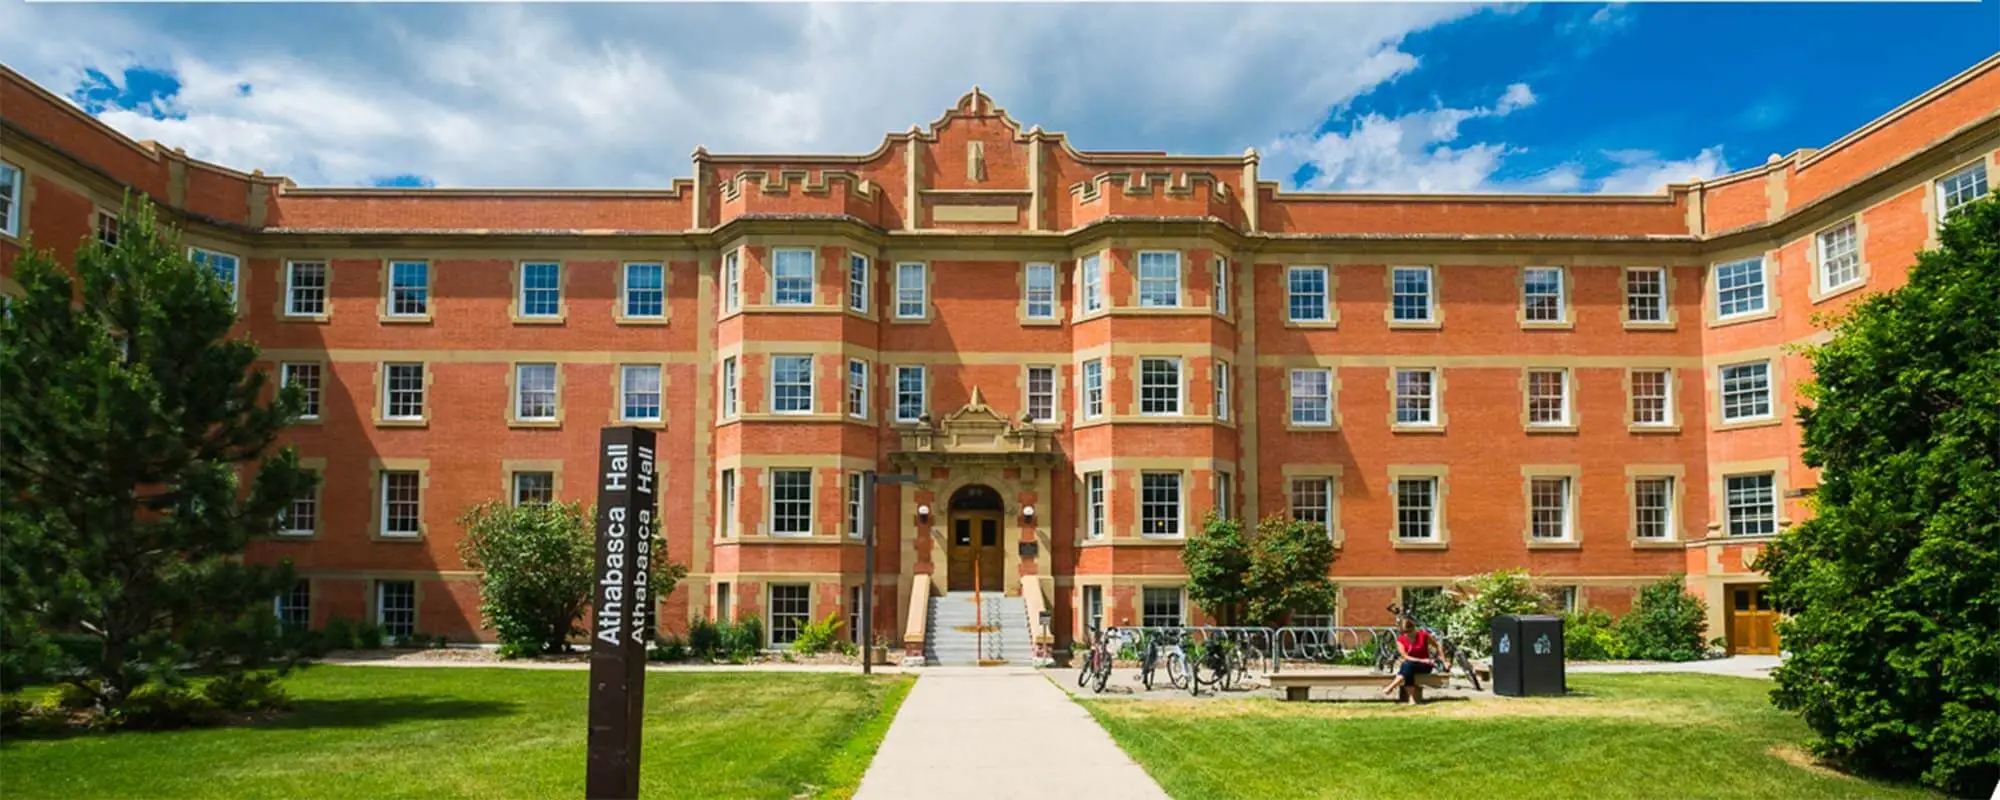 University of Alberta Contracts YuJa, Inc. for Comprehensive Lecture Capture and Video Streaming Solution